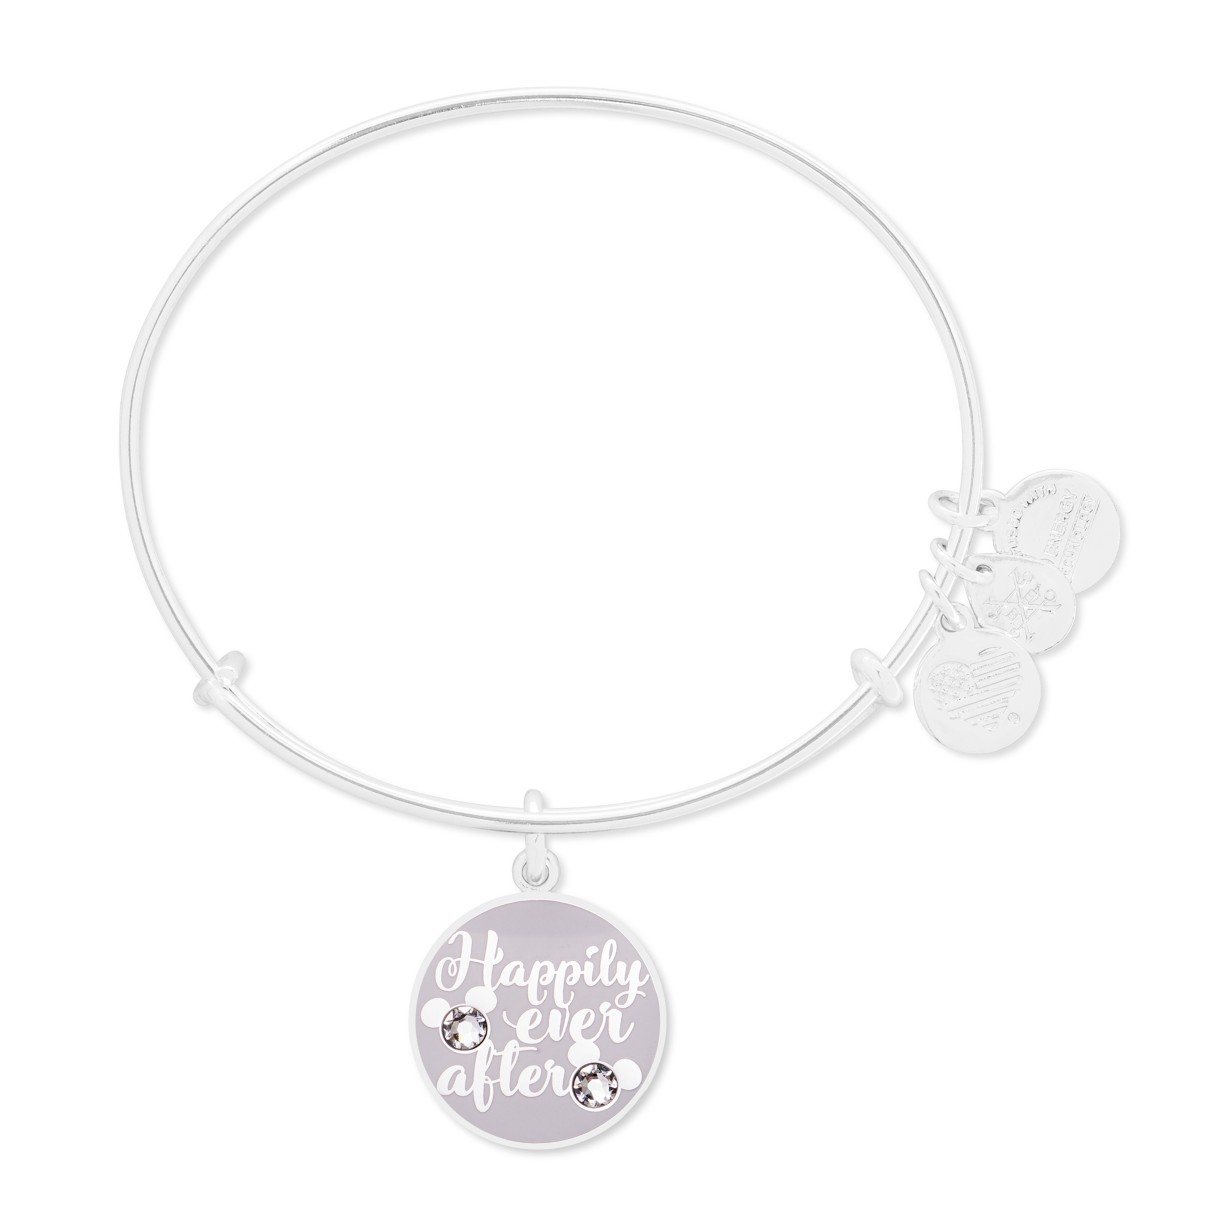 Disney Princess Happily Ever After Bangle by Alex and Ani